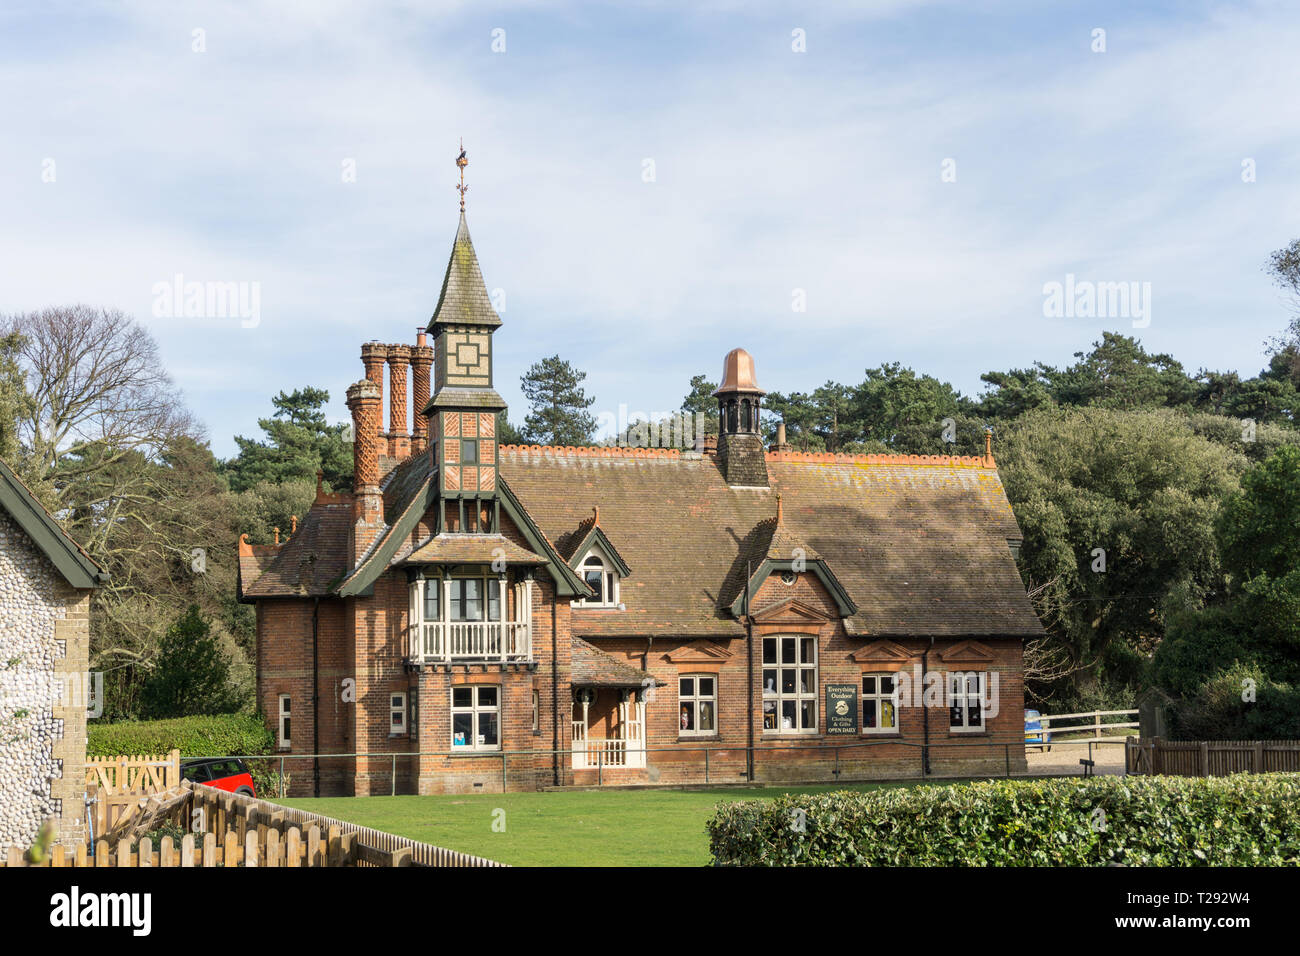 The old Reading Room in the estate village of Holkham, North Norfolk, UK, now the home to Everthing Outdoor, a clothing shop. Stock Photo